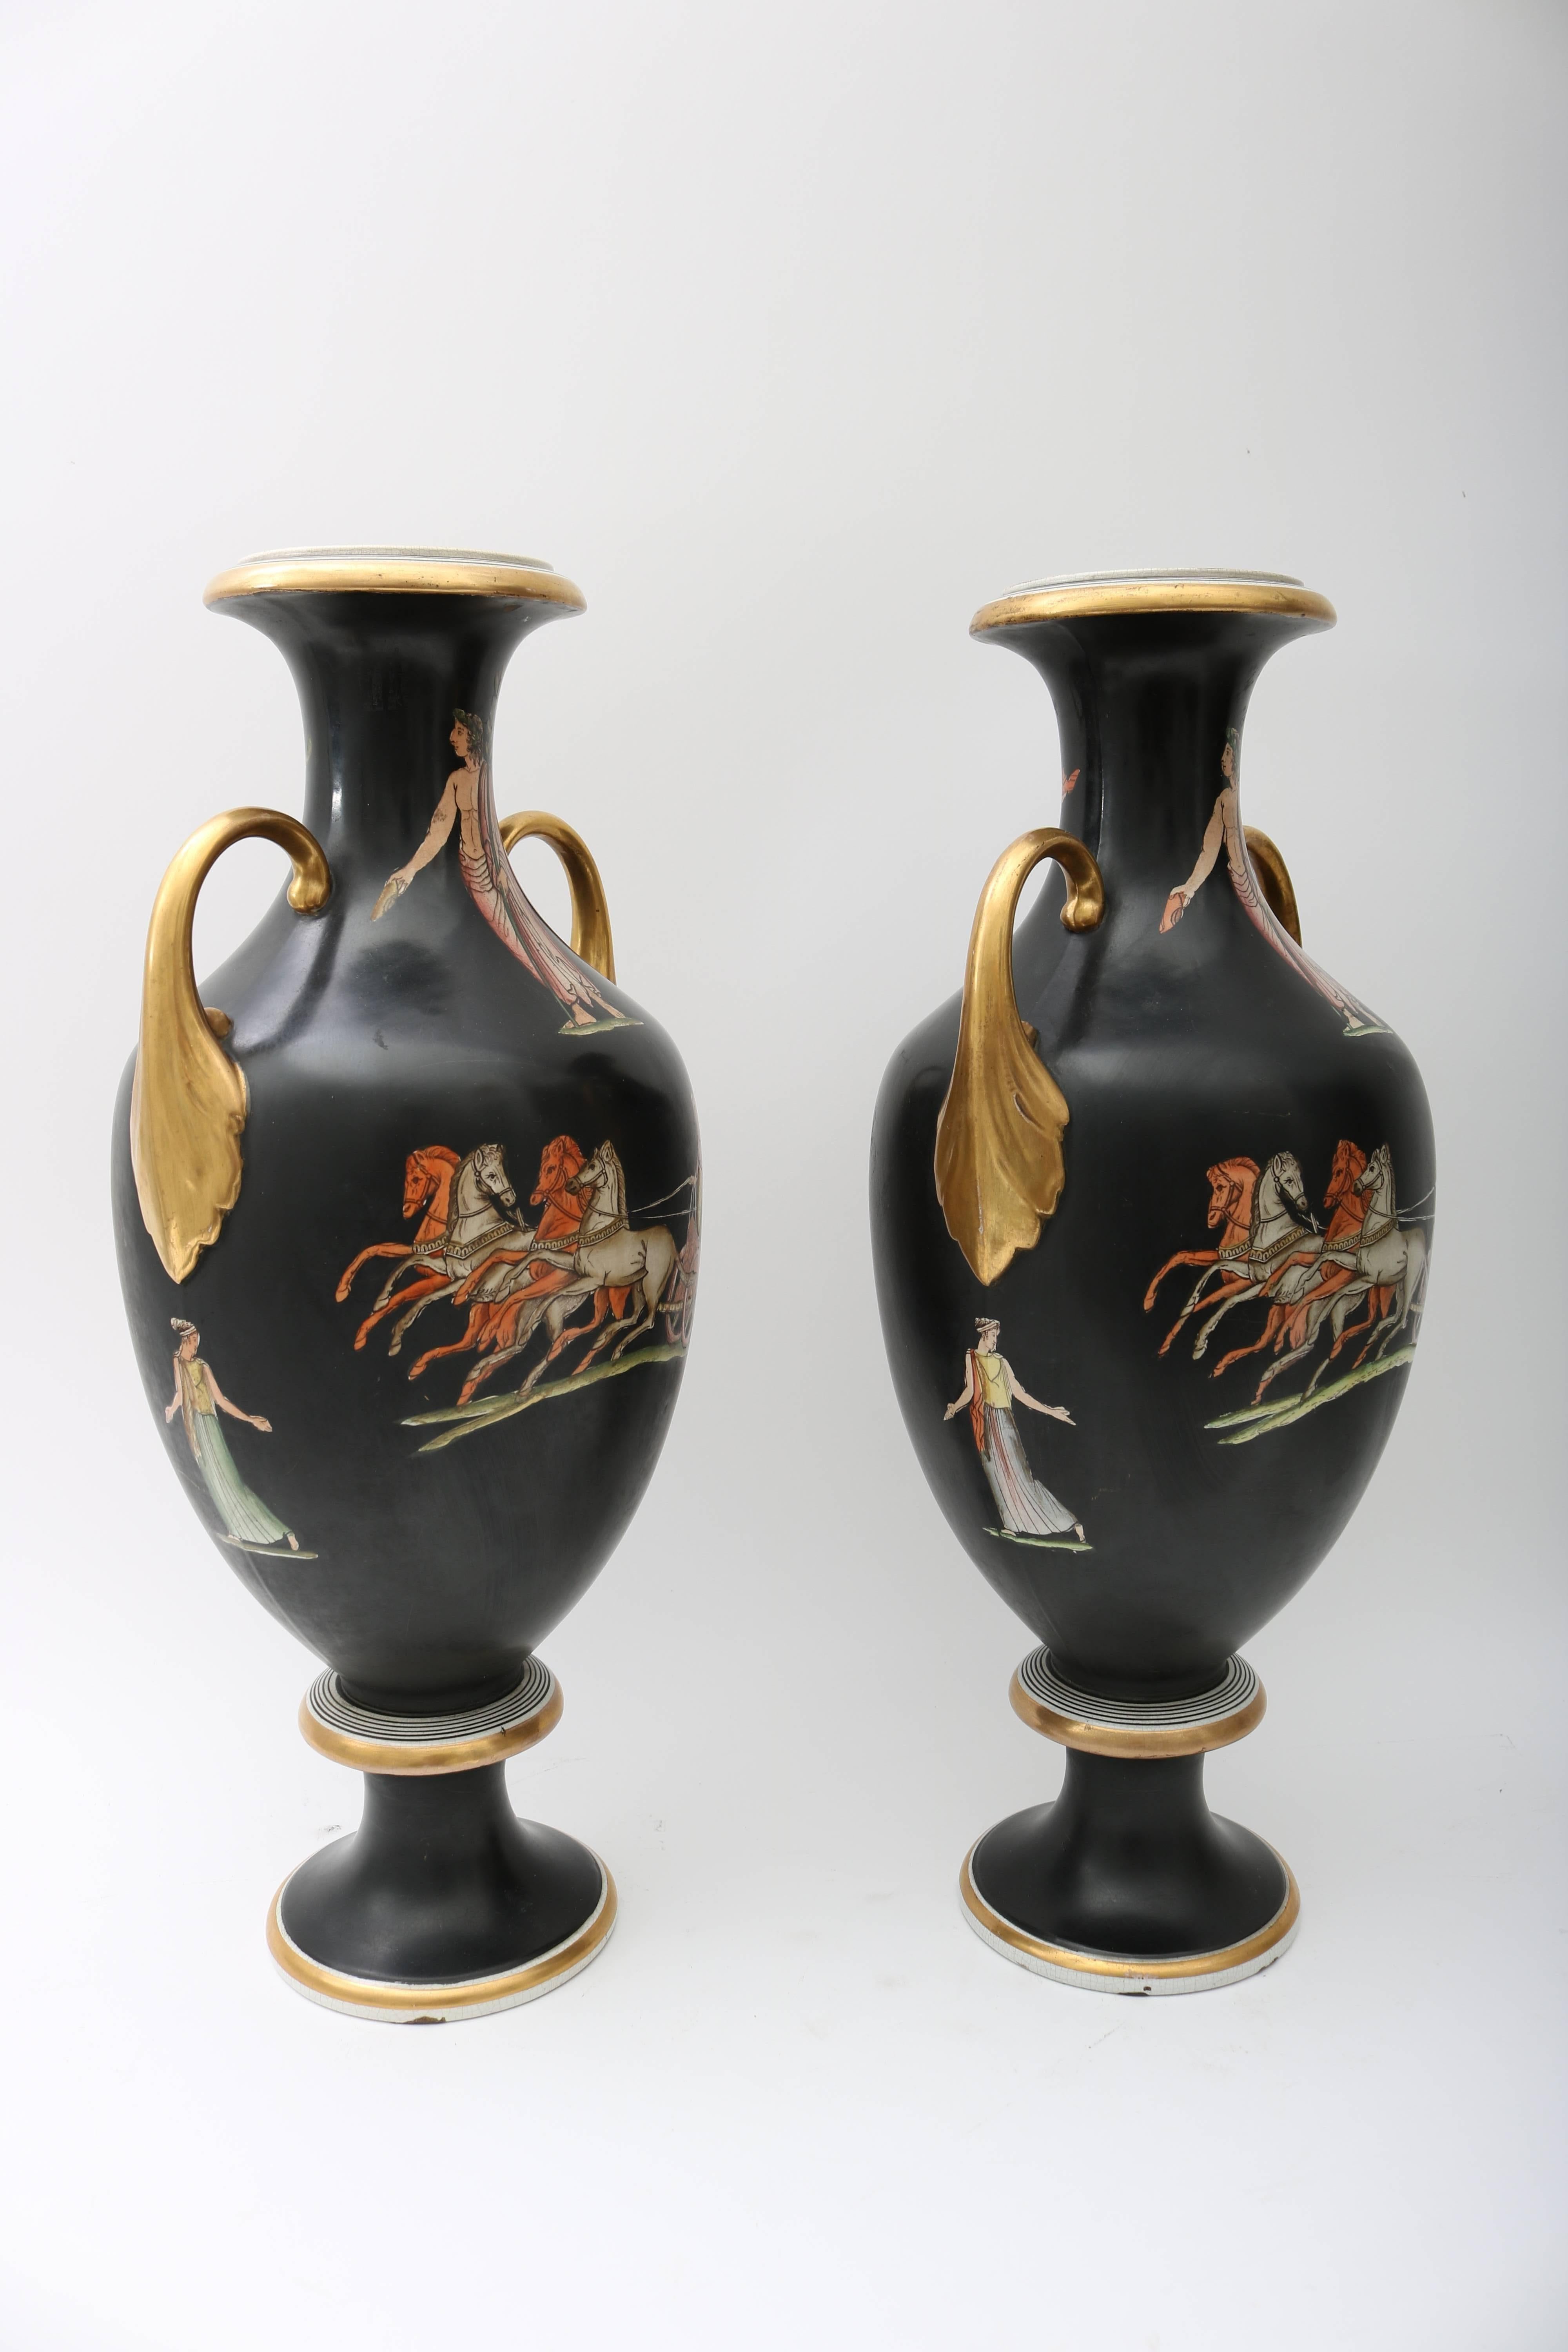 Neoclassical Revival Pair of 19th Century Neo-Classical Grand Tour Porcelain Vases in Black 